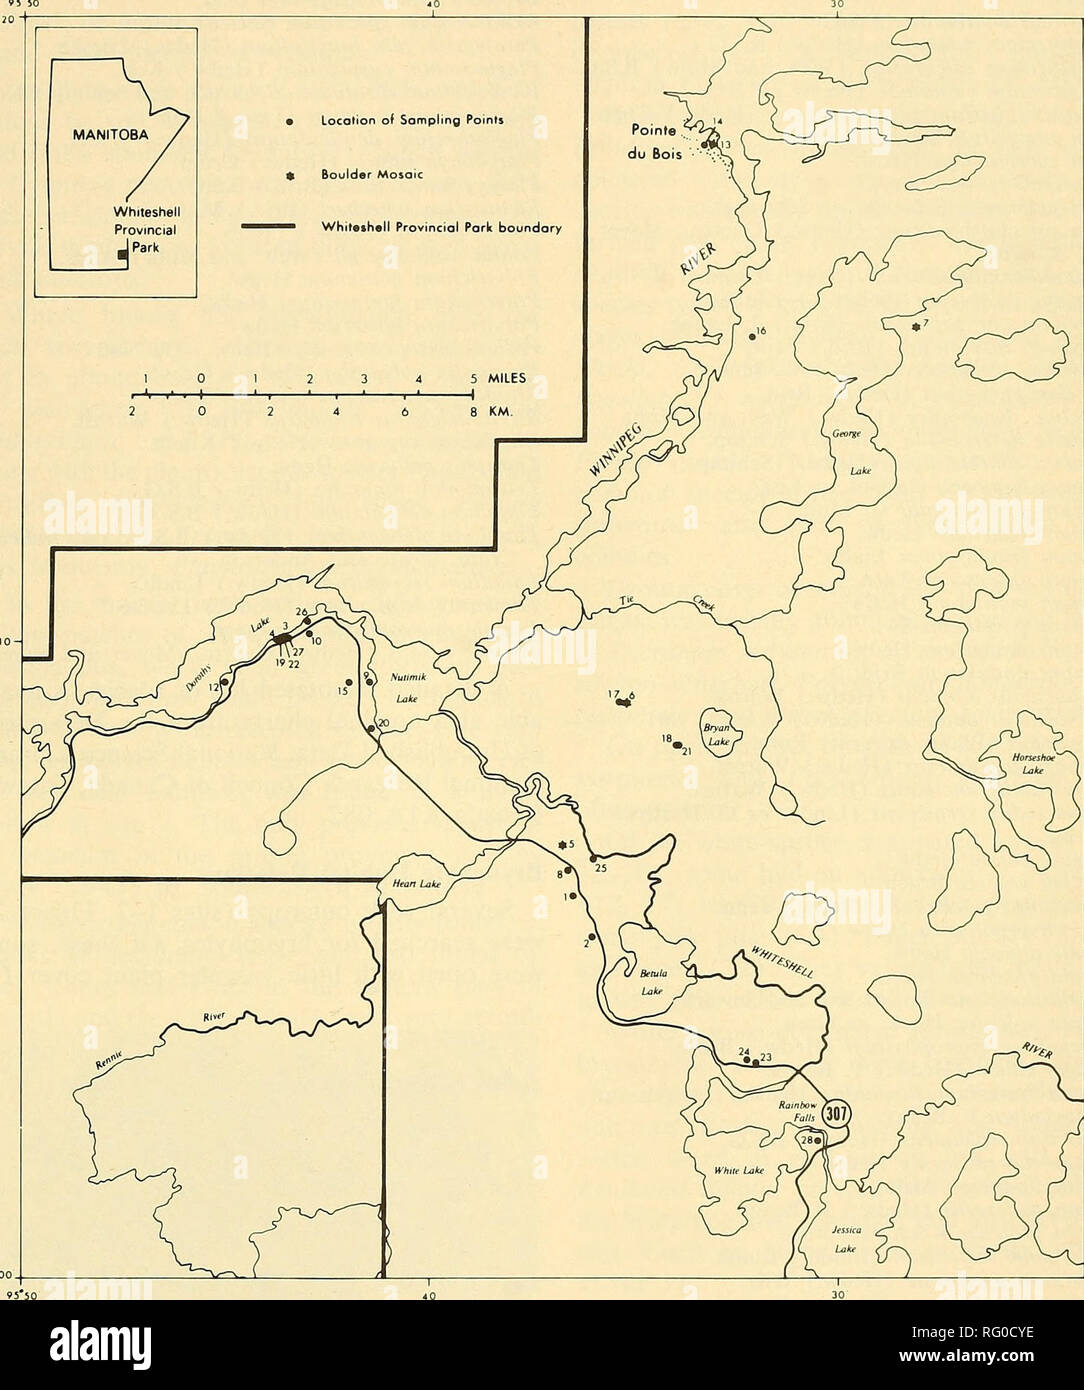 . The Canadian field-naturalist. 1973 Stringer and Stringer: Whiteshell Provincial Park Bryophytes 421. STI)INGER/grl^l/73 Figure 2. Western part of Whiteshell Provincial Park, showing bryophyte collecting sites 1-10, 12-28. Amblystegium varium (Hedw.) Lindb. Anomodon attenuatiis (Hedw.) Hiib. Anomodon rostratiis (Hedw.) Schimp. Aulacomnium palustre (Hedw.) Schwaegr. Barbula convoluta Hedw. Barbida imguiculata Hedw. Bartramia pomiformis Hedw. Brachythecium campestre (C. Miill.) B.S.G.. Please note that these images are extracted from scanned page images that may have been digitally enhanced fo Stock Photo